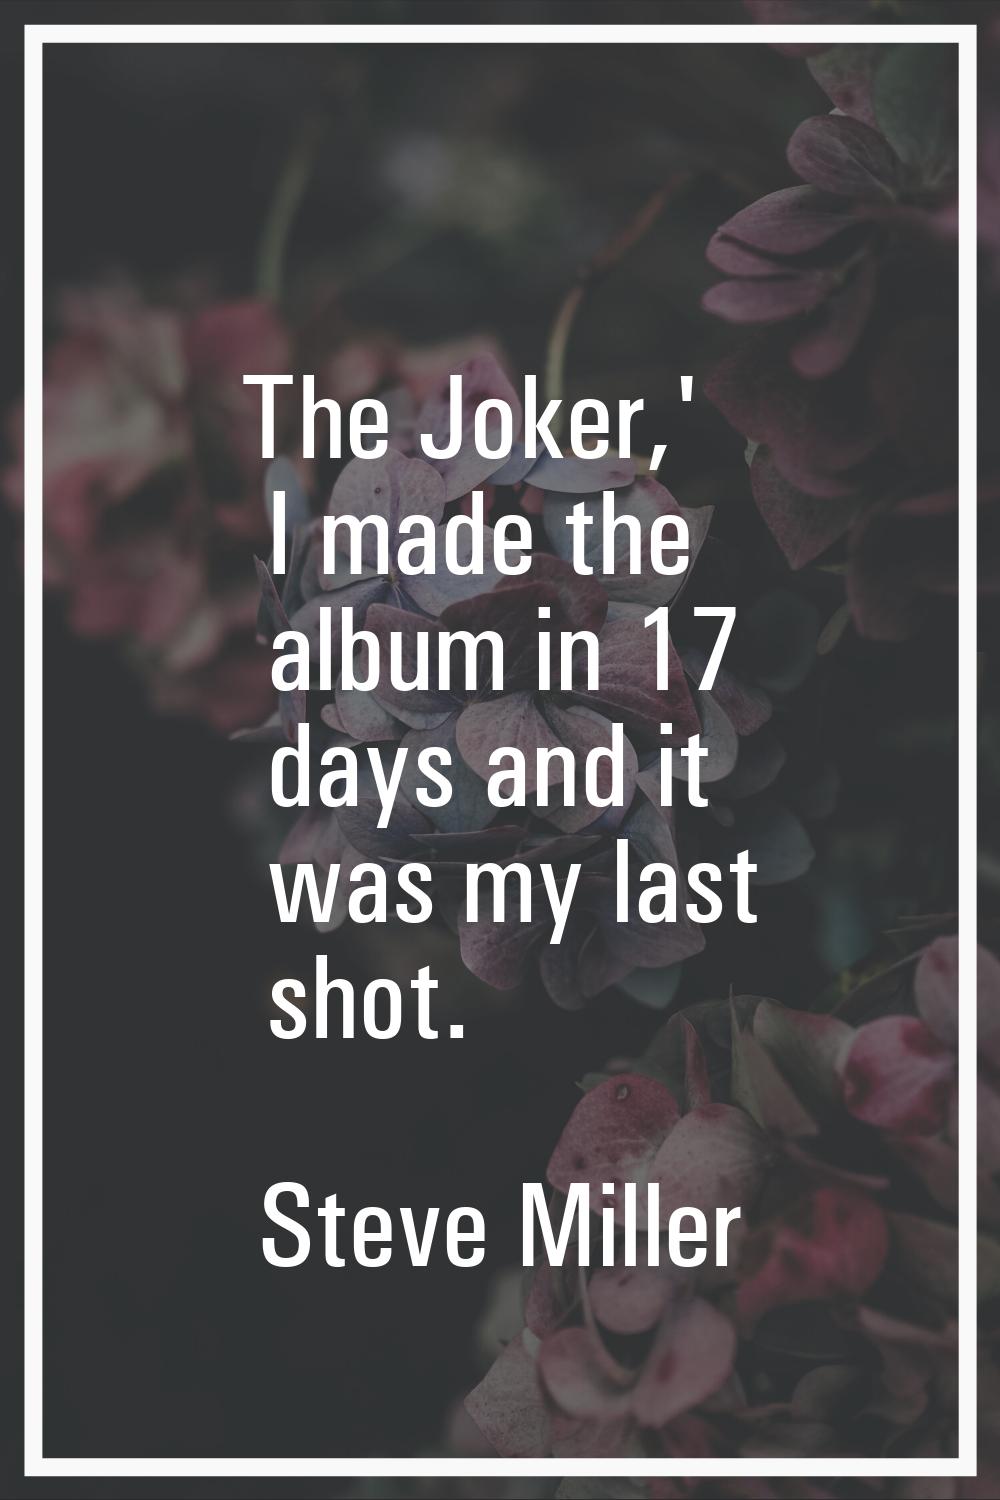 The Joker,' I made the album in 17 days and it was my last shot.